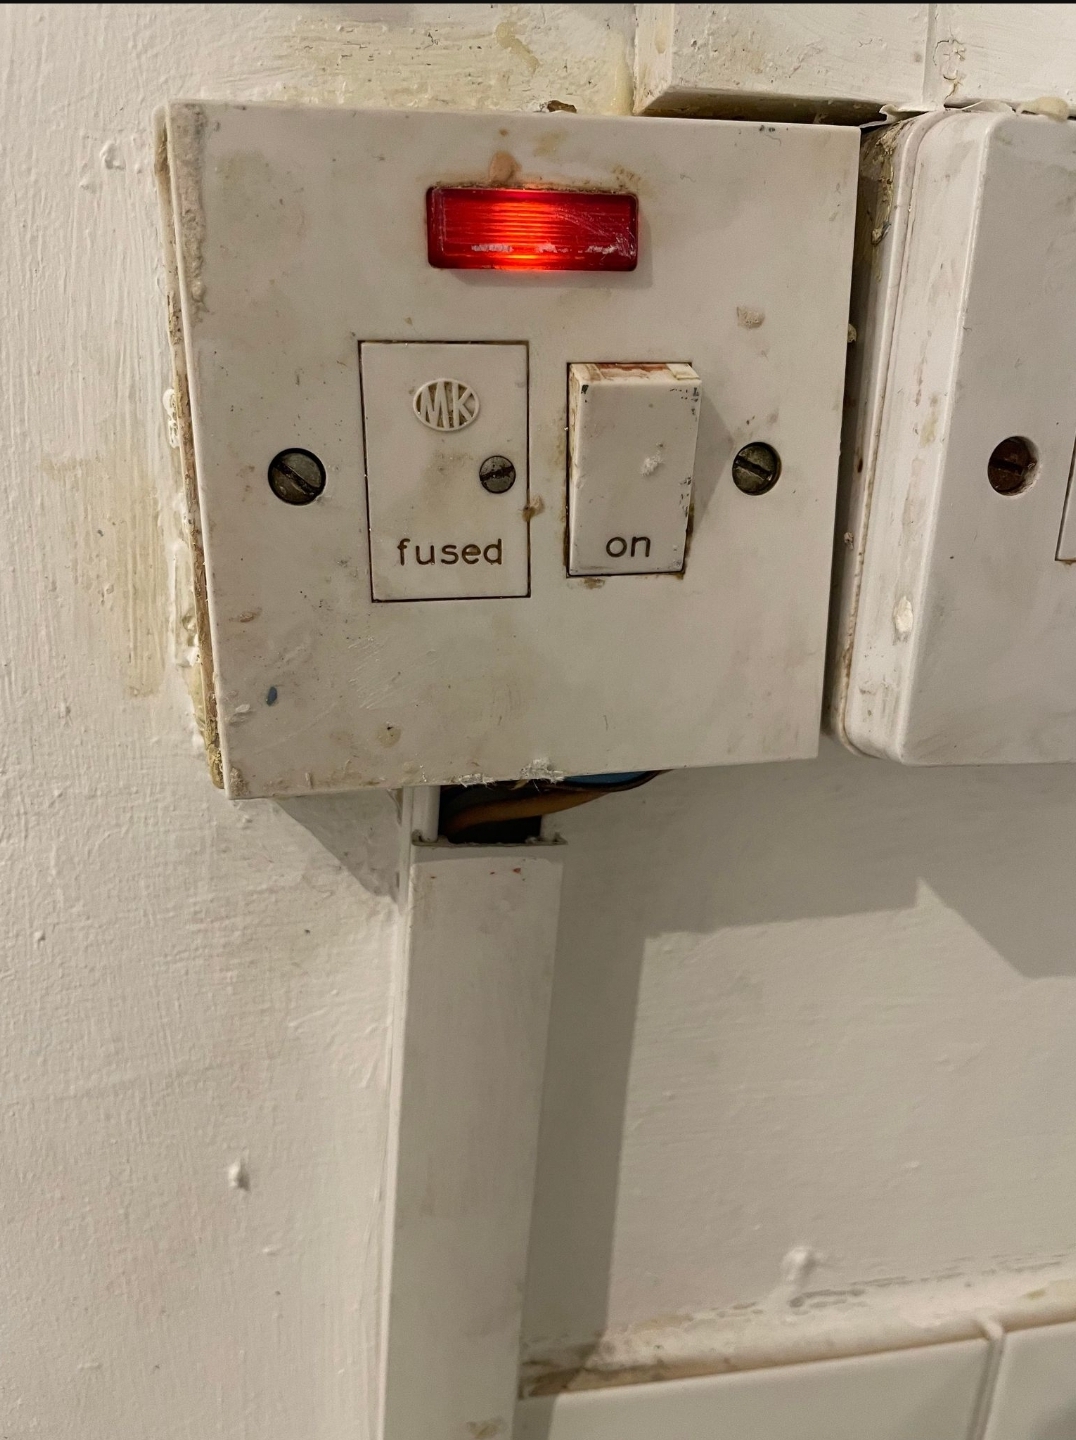 Electrical fault